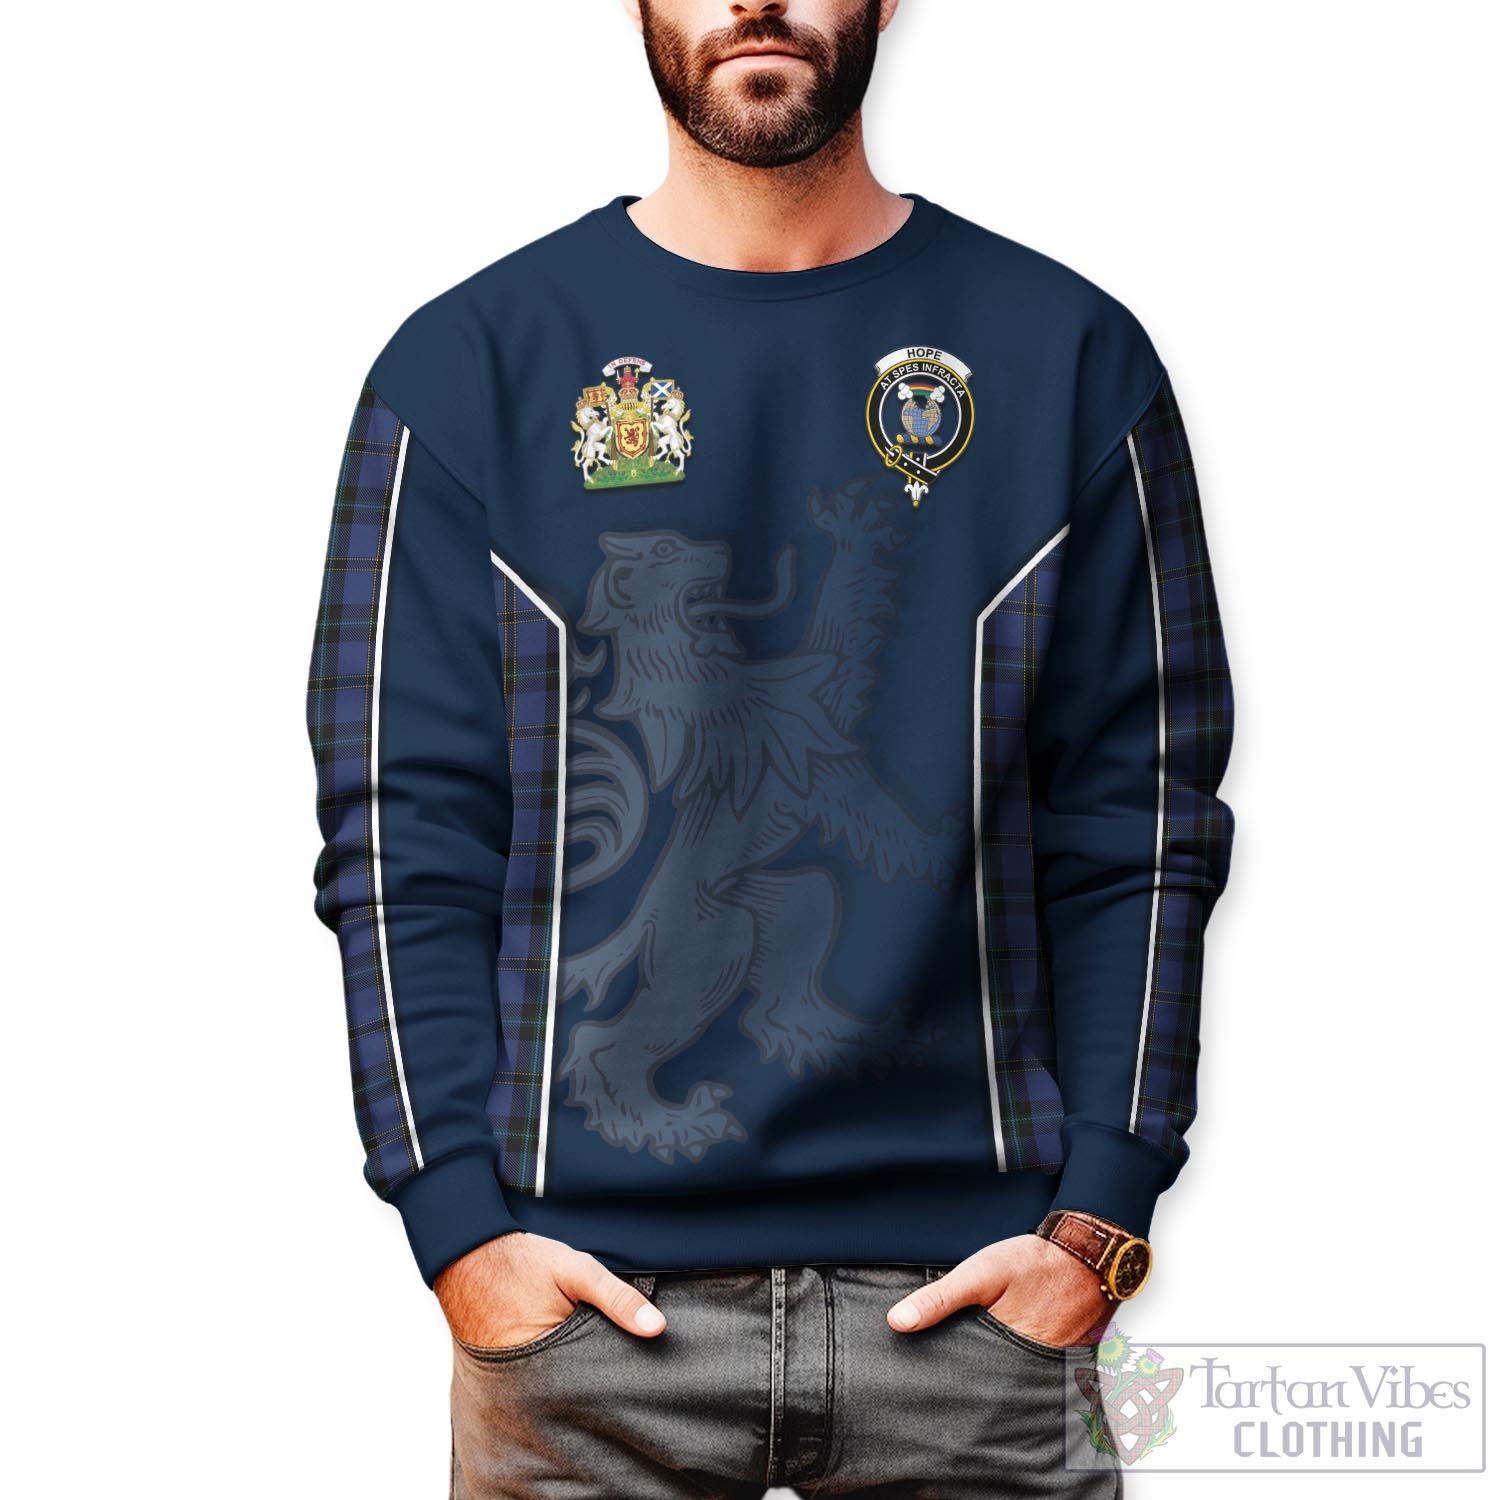 Tartan Vibes Clothing Hope (Vere-Weir) Tartan Sweater with Family Crest and Lion Rampant Vibes Sport Style